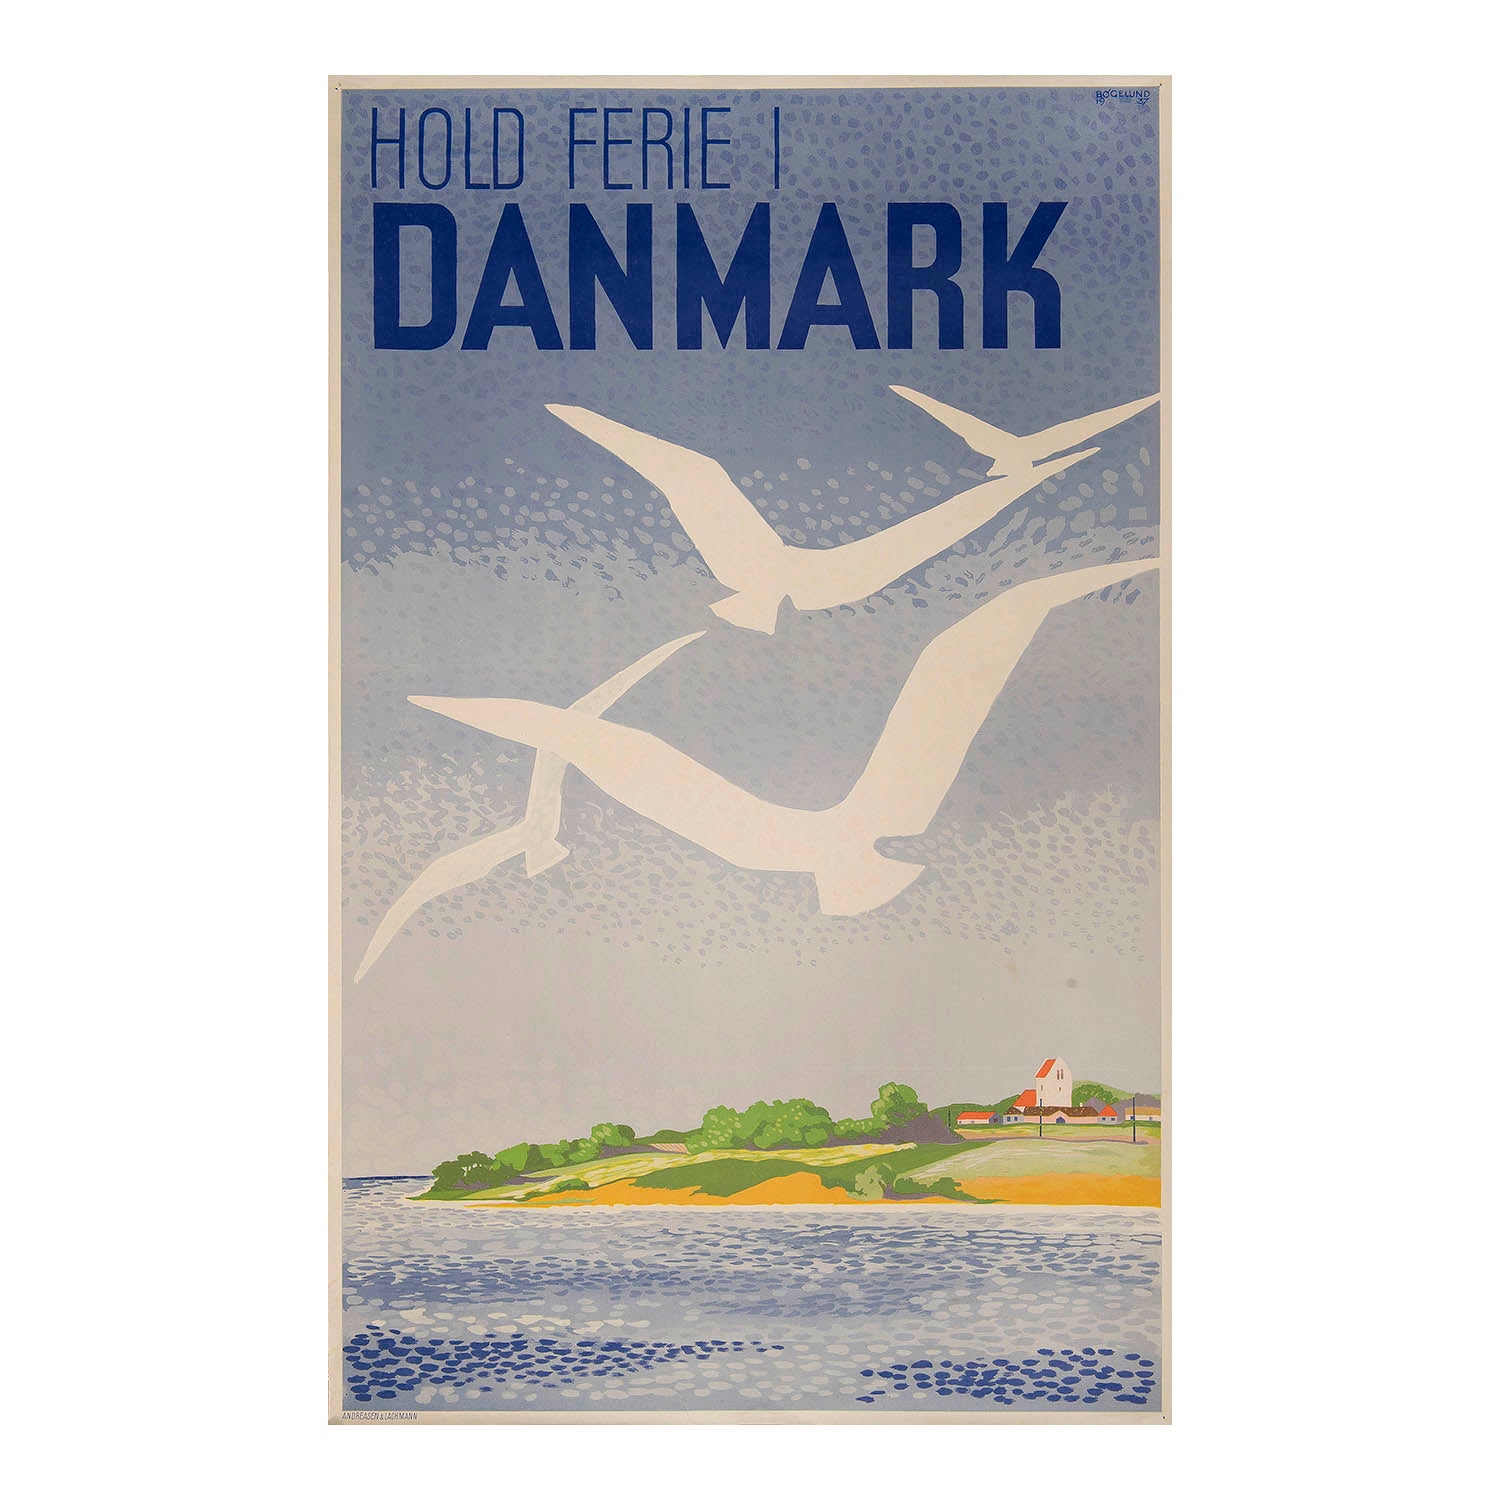 Danish tourism poster, Hold Ferie i Danmark (Take Your Vacation in Denmark) designed by Thor Bogelund (1890-1959) and printed in 1937. The design depicts a coastal scene with seagulls against a blue sky.